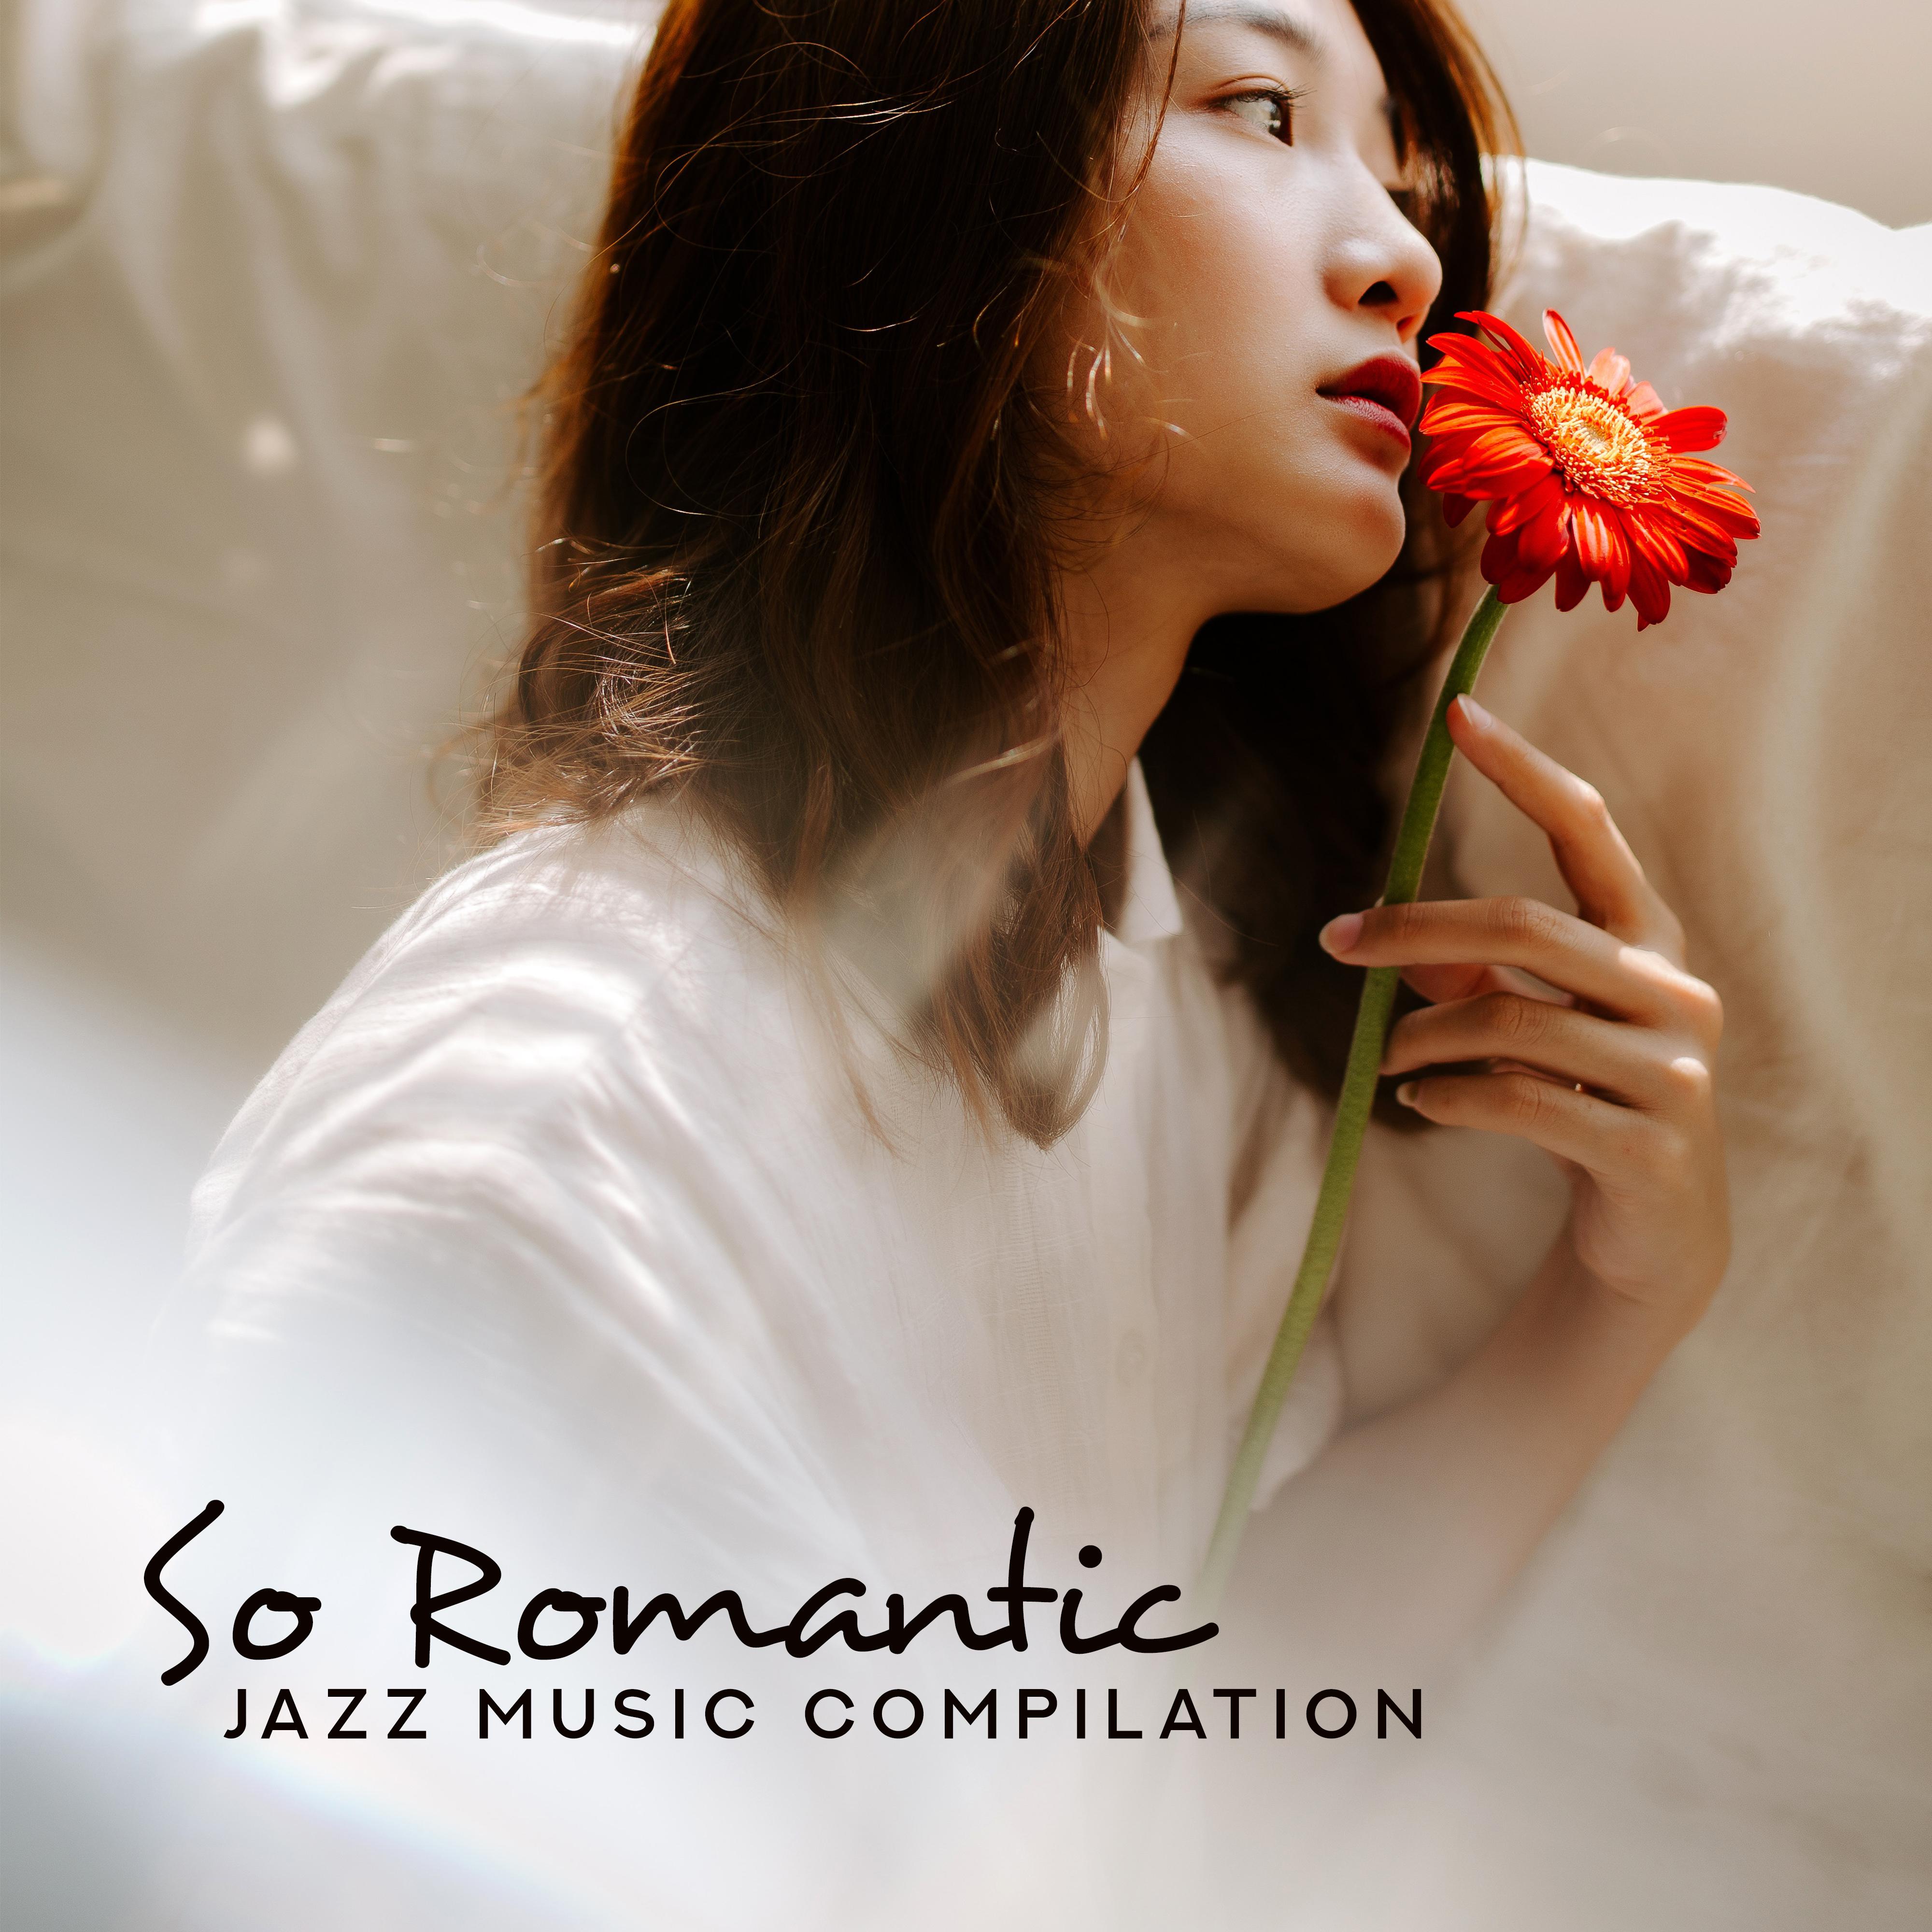 So Romantic Jazz Music Compilation: 2019 Fresh Instrumental Smooth Jazz Songs, Intimate Moments for Couples, Full of Love, Good Lovers Emotions, Nice Dinner for Two Background Melodies